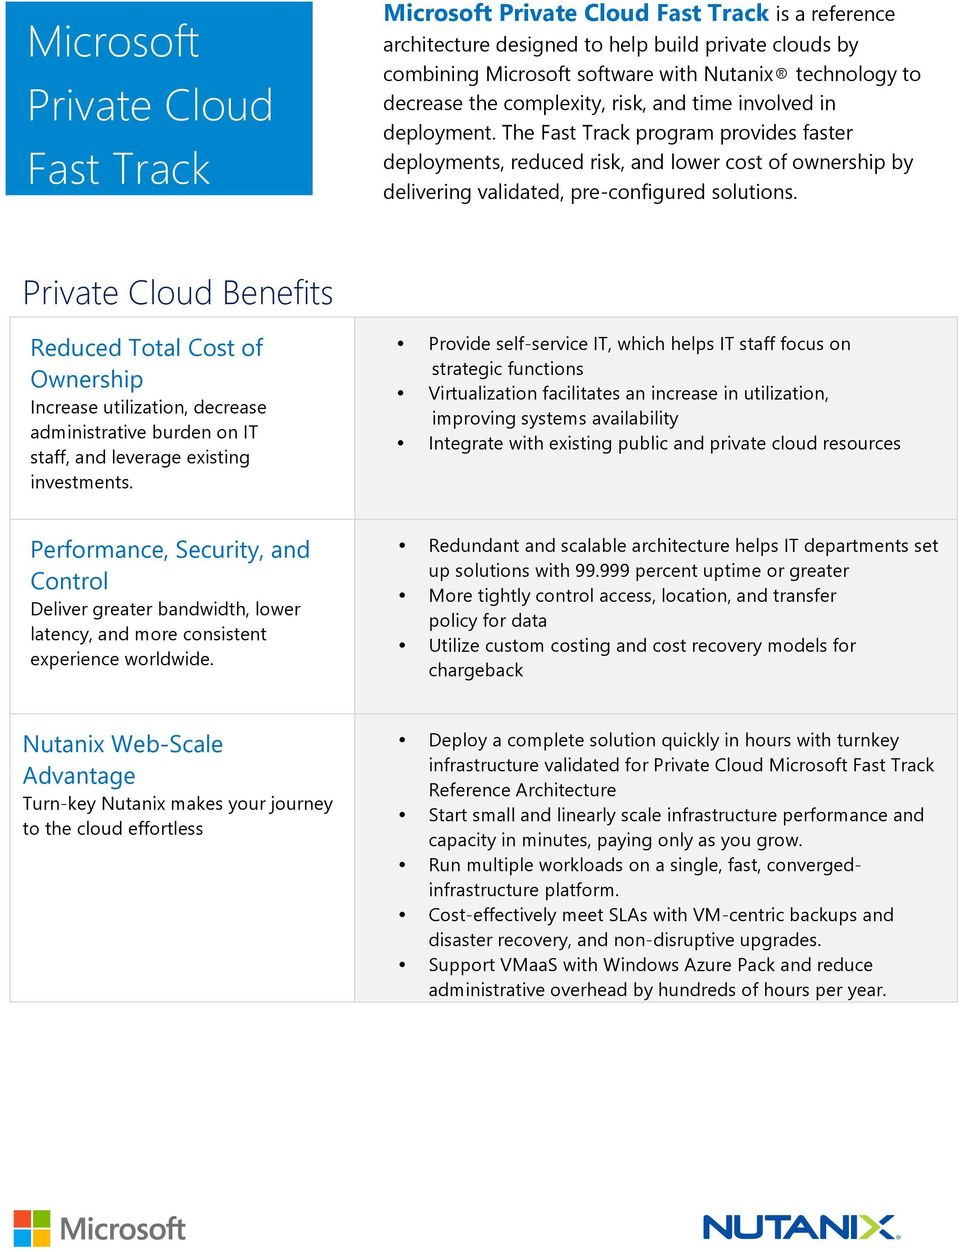 The Fast Track program provides faster deployments, reduced risk, and lower cost of ownership by delivering validated, pre- configured solutions.